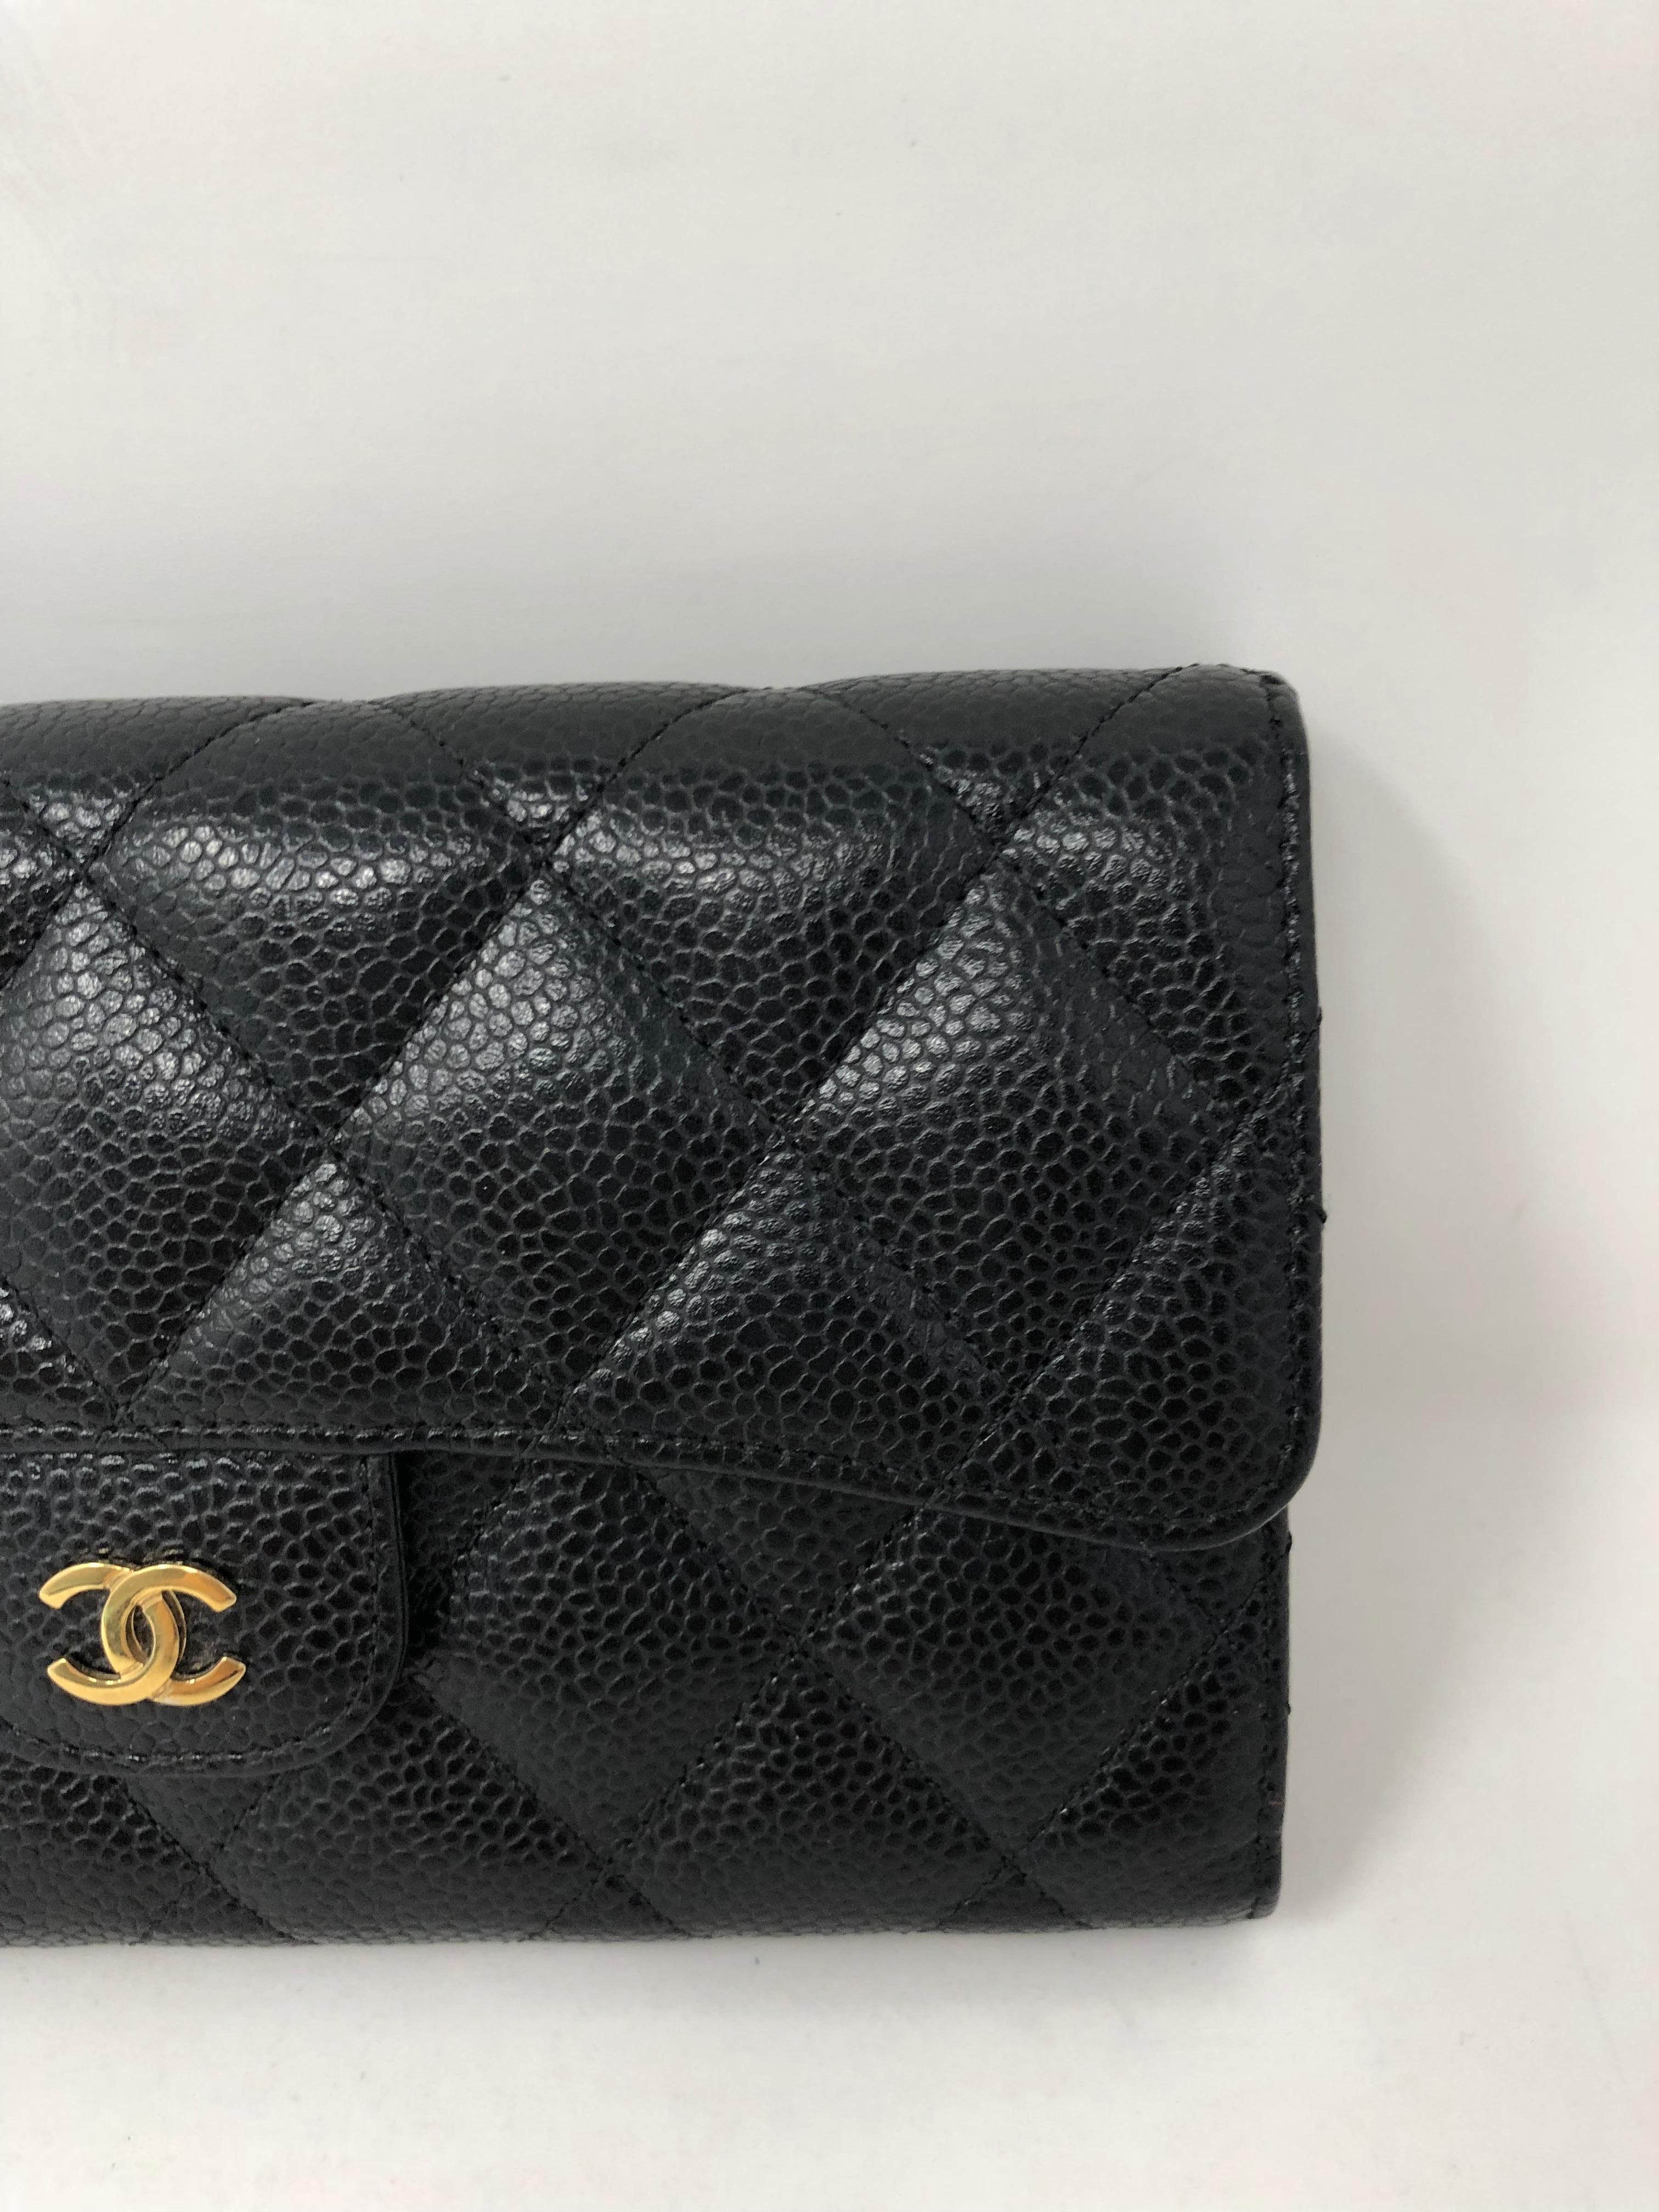 Chanel Black Wallet in Caviar leather. Good condition. Hard to find size. Includes authenticity card. Guaranteed authentic.